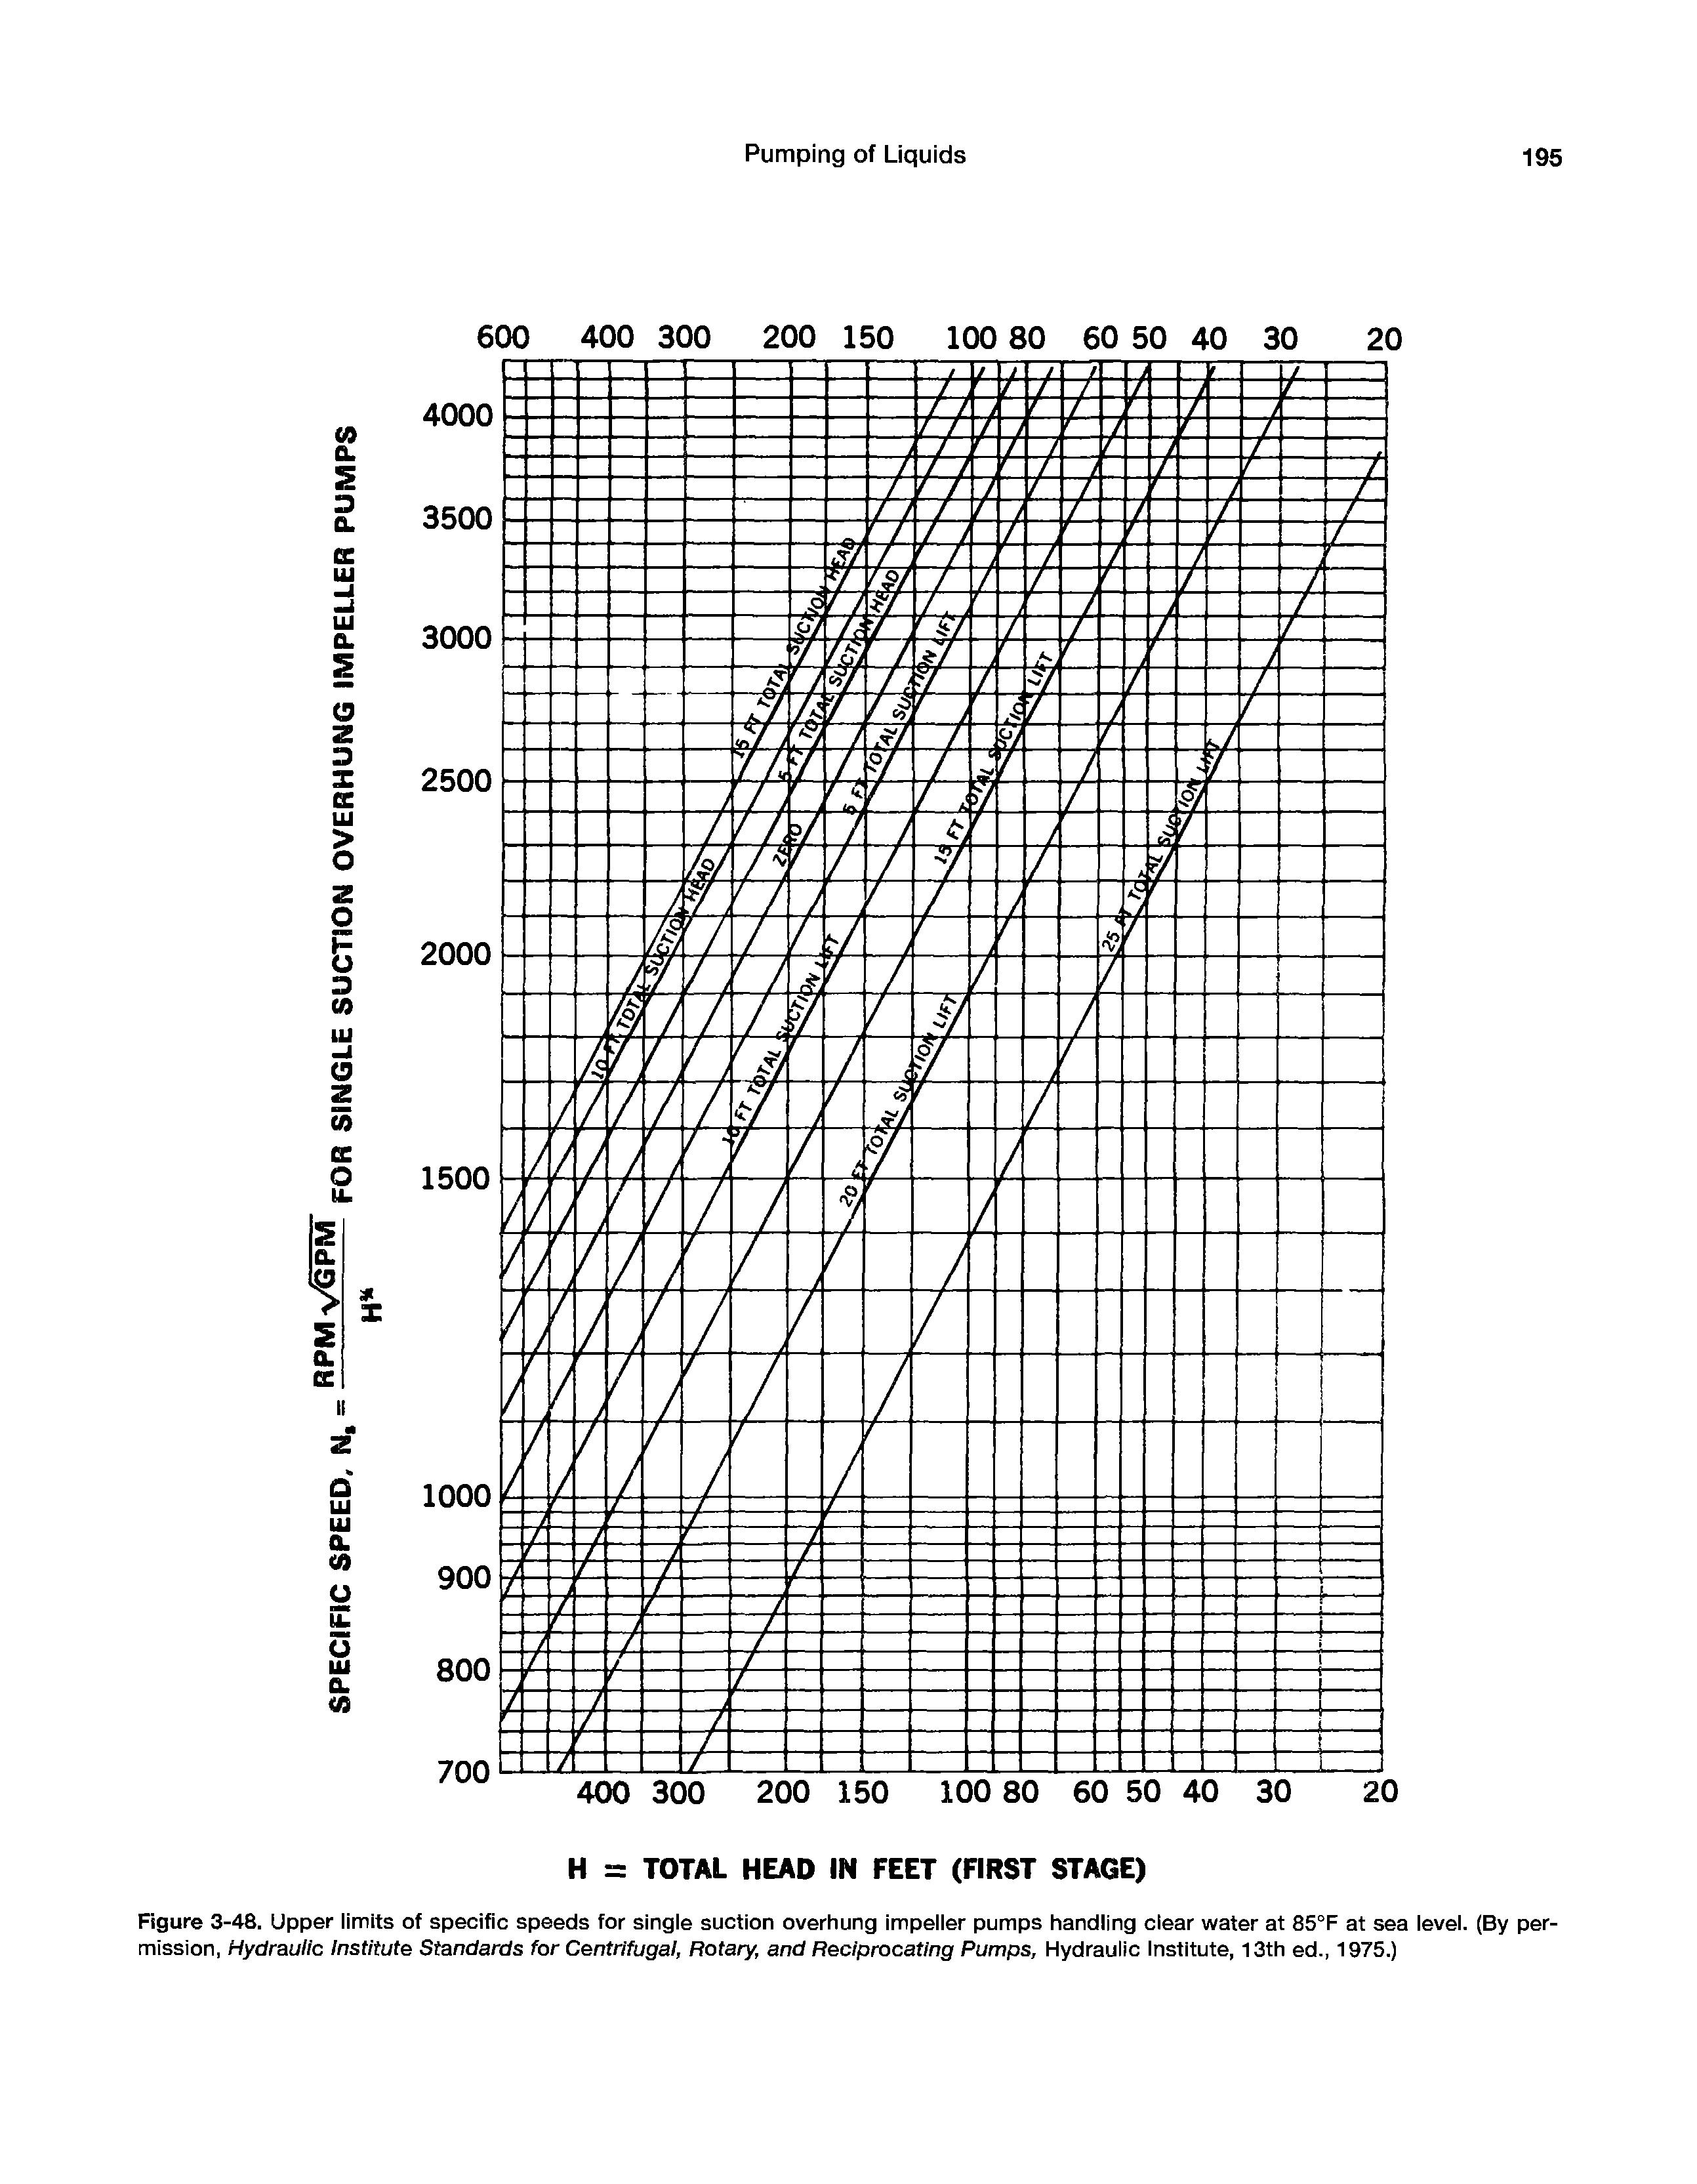 Figure 3-48. Upper limits of specific speeds for single suction overhung impeller pumps handling dear water at 85°F at sea level. (By permission, Hydraulic Institute Standards for Centrifugal, Rotary, and Reciprocating Pumps, Hydrauiic Institute, 13th ed., 1975.)...